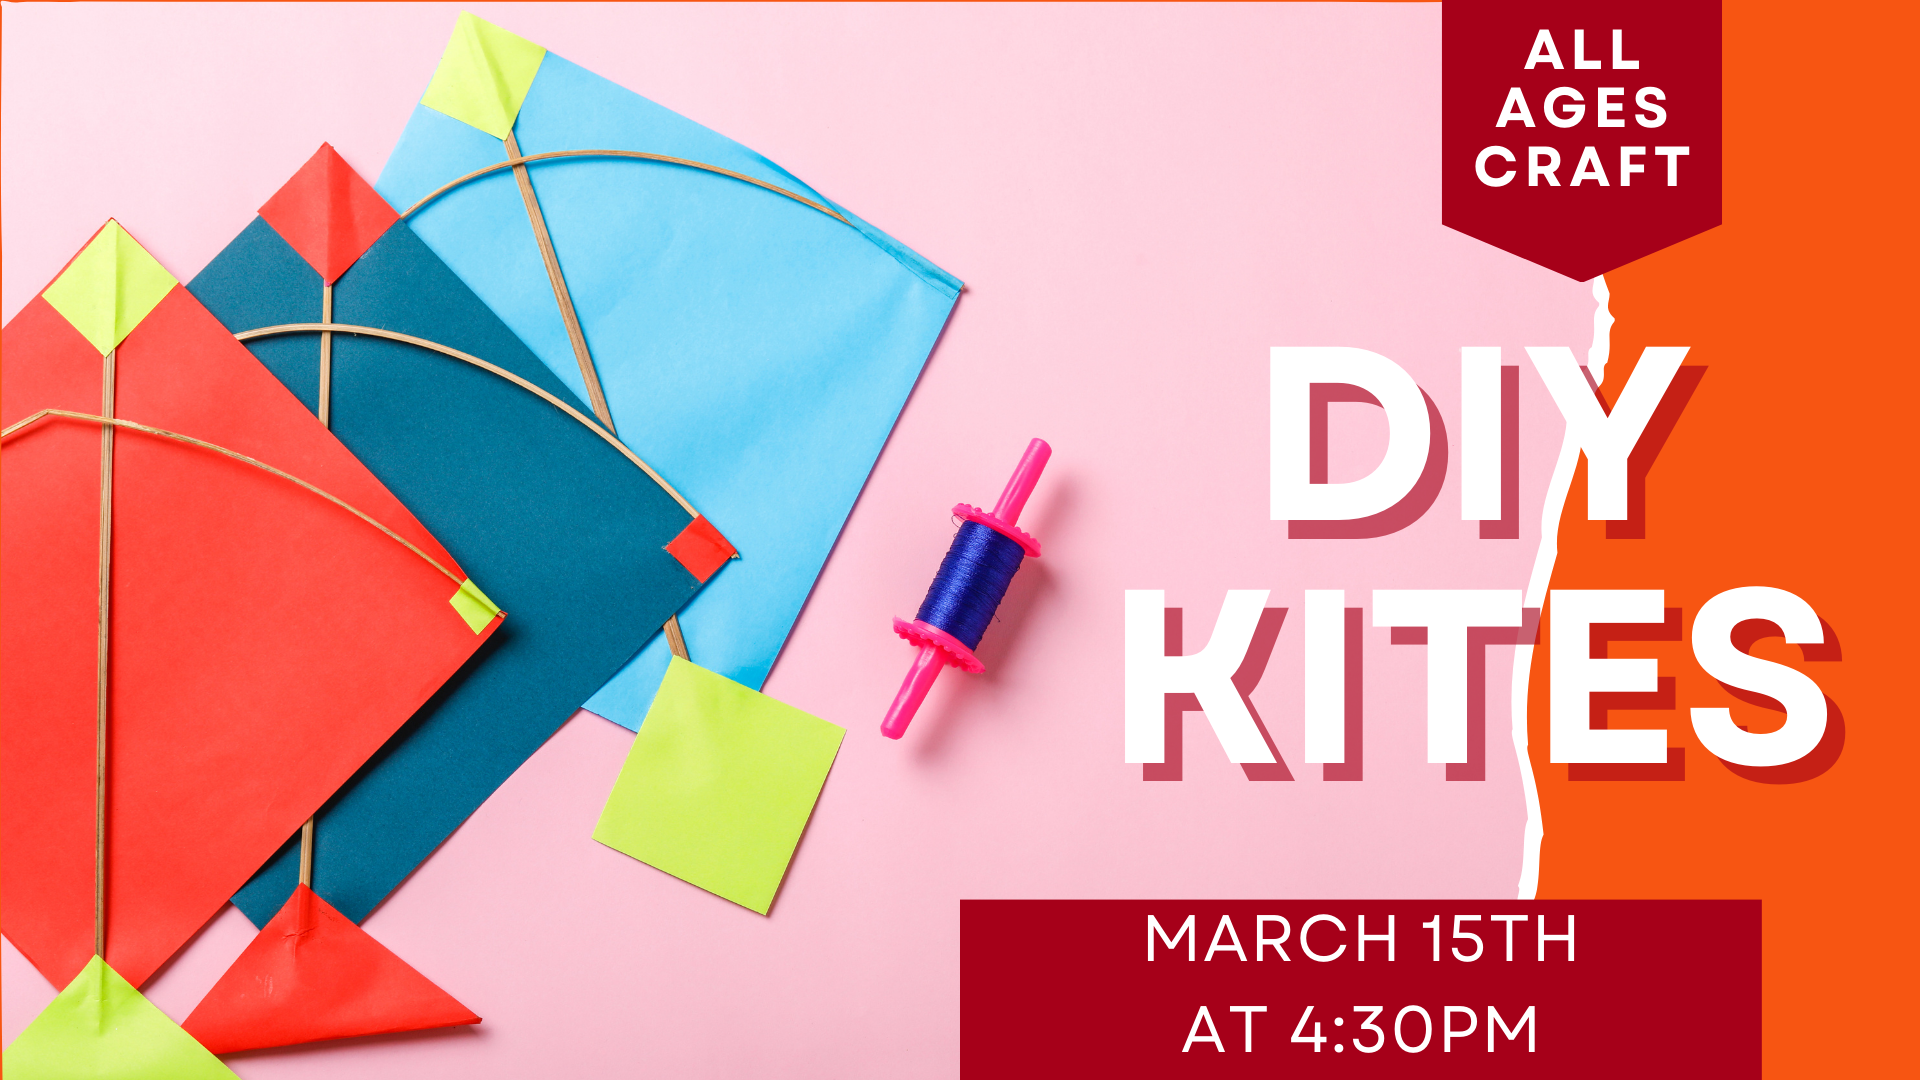 Diy Kite craft, March 15th at 4:30pm, Riverside Park, All ages